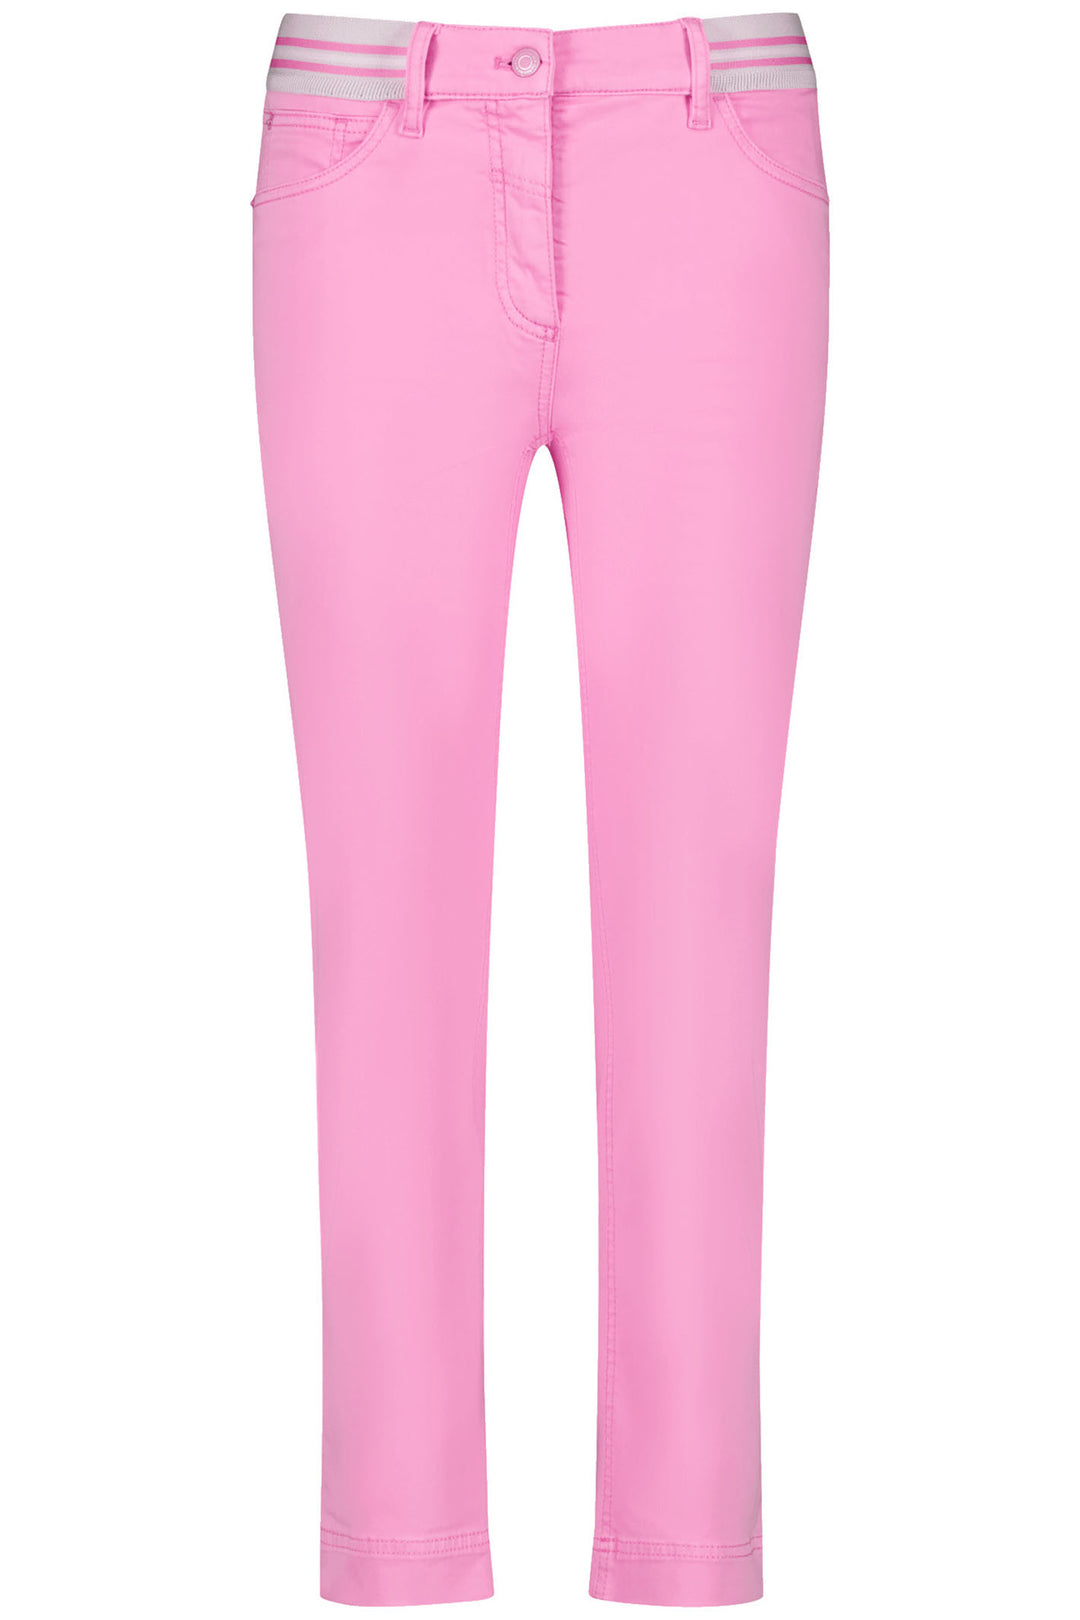 Gerry Weber 222028 Aurora Pink Straight Fit 78th Trousers - Experience Boutique